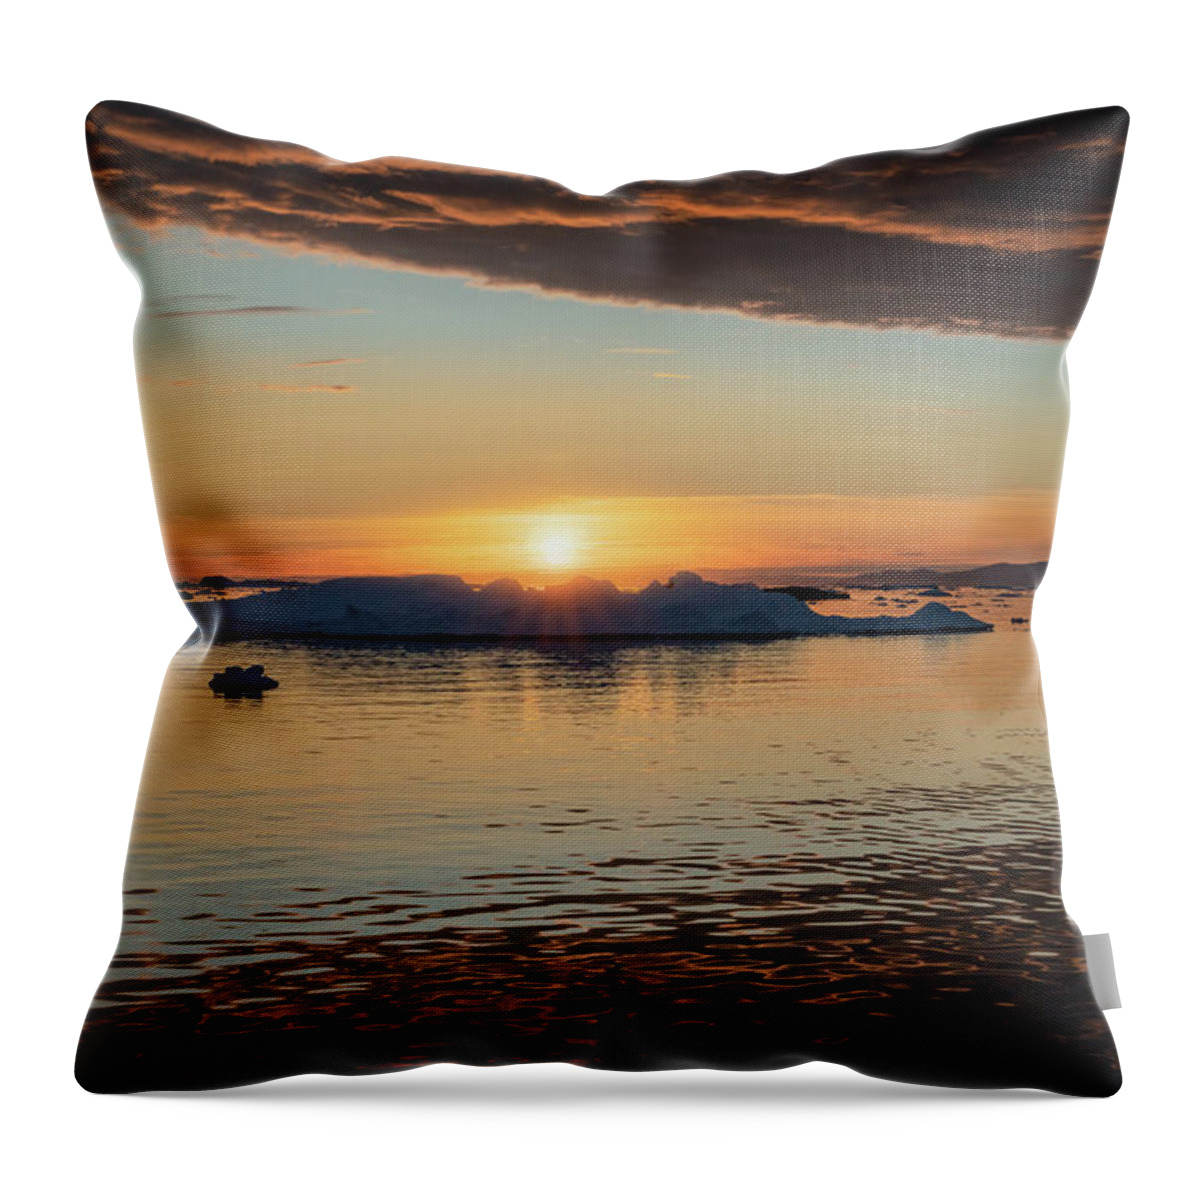 Sunrise Throw Pillow featuring the photograph Sunset or sunrise? by Anges Van der Logt